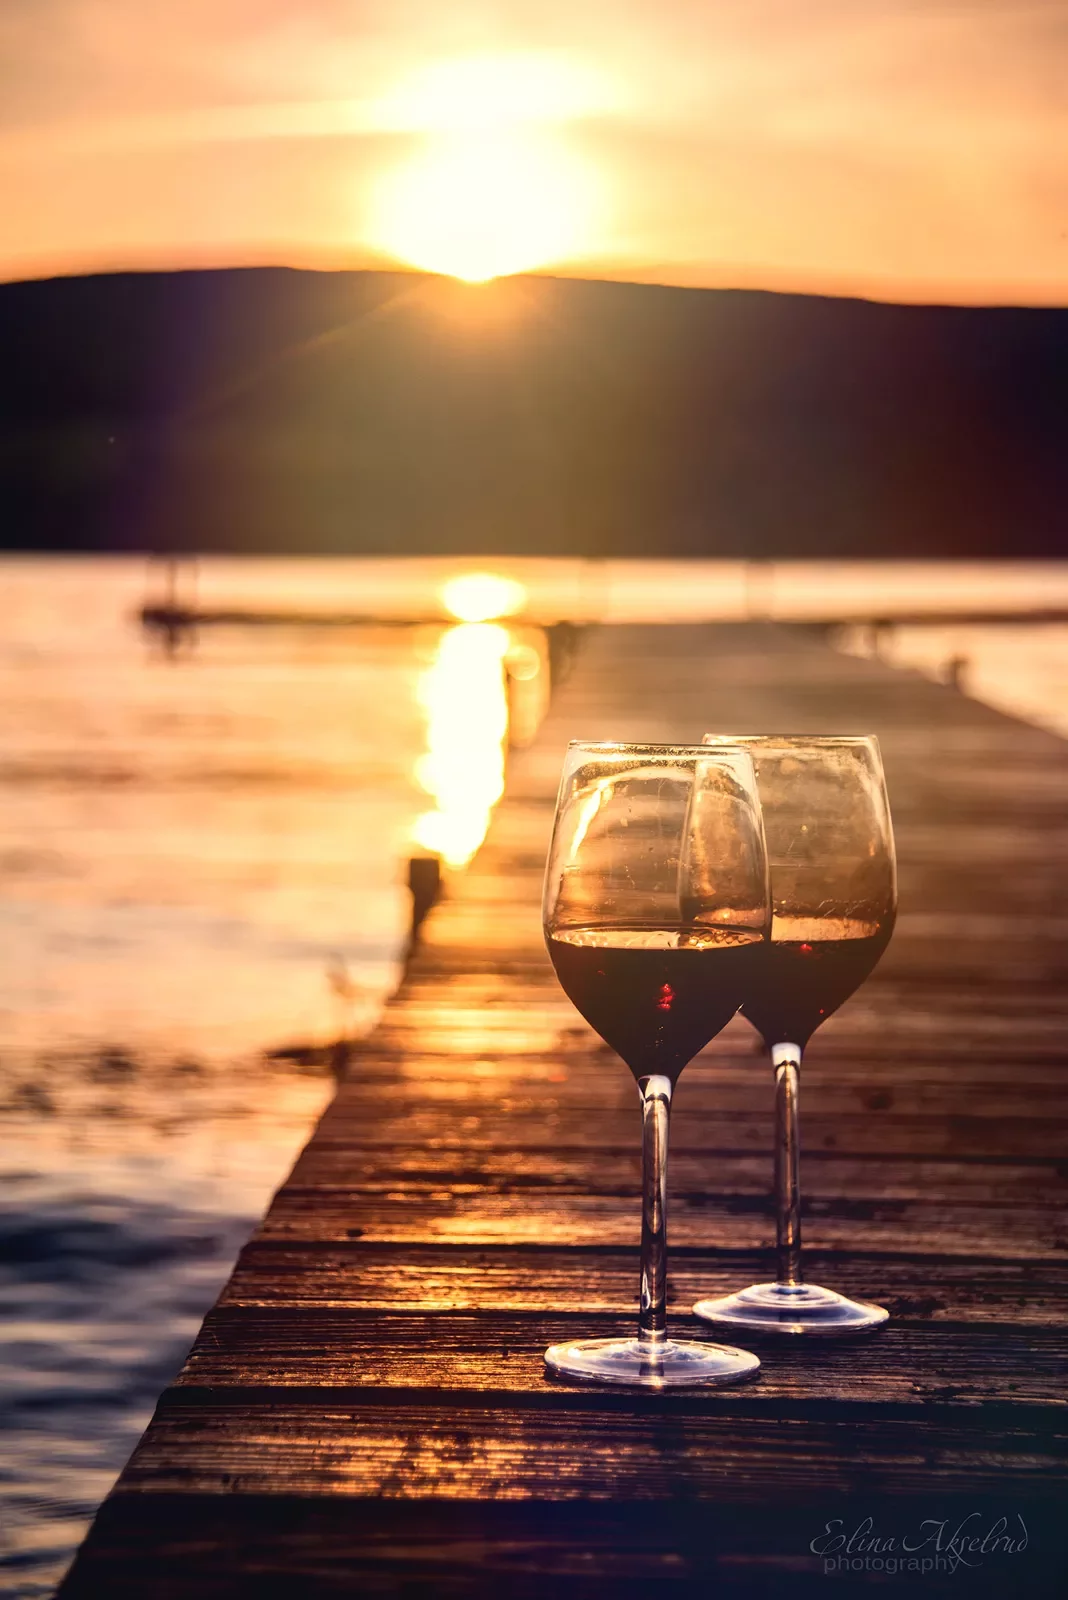 Two wine glasses sitting on pier, sunset in background.